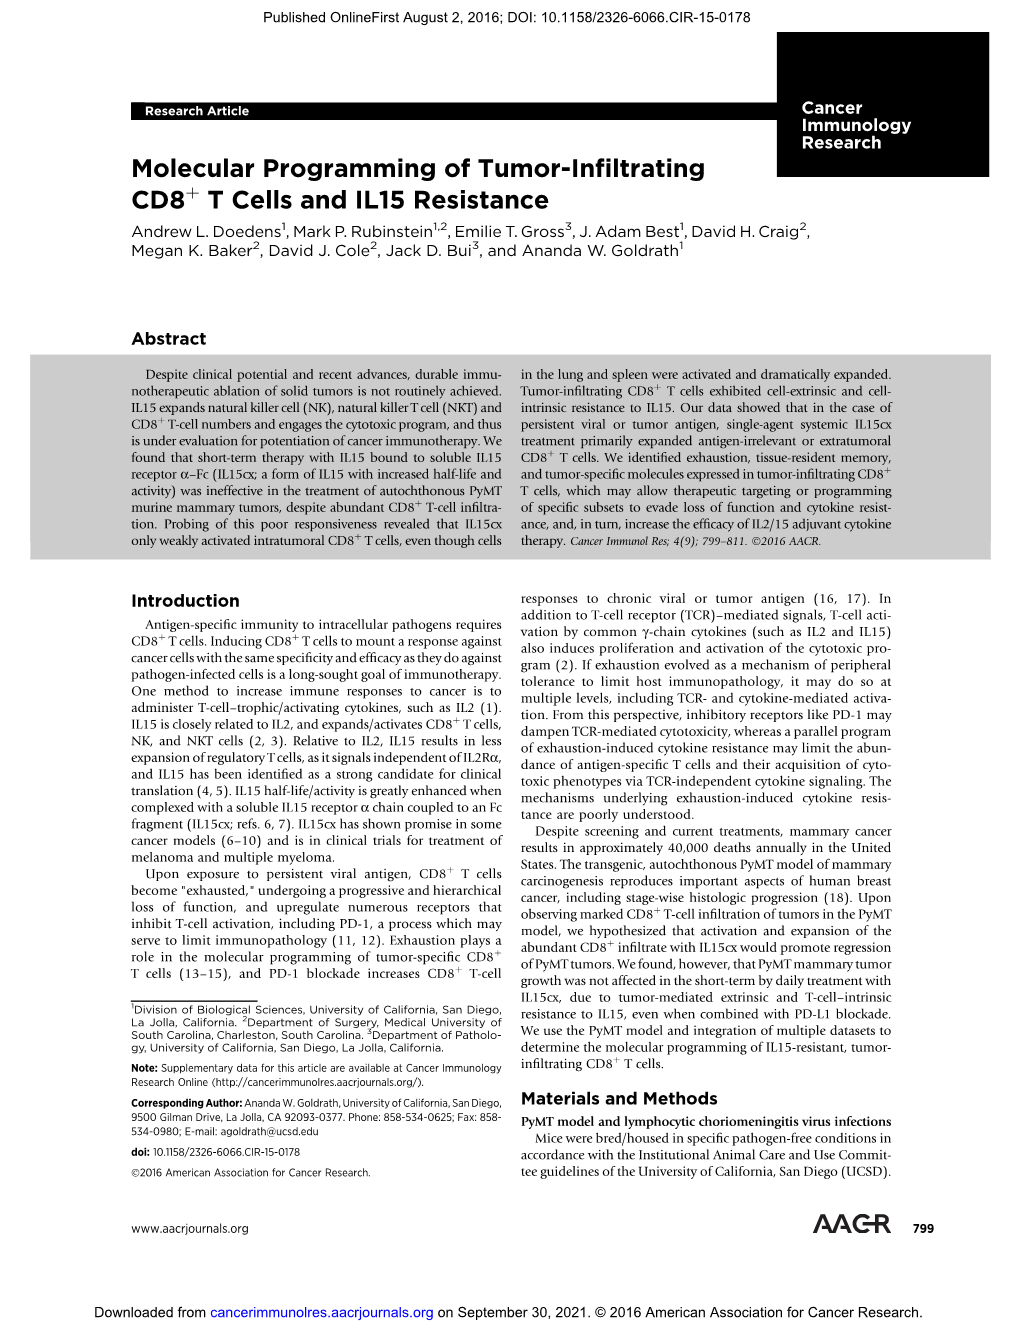 Molecular Programming of Tumor-Infiltrating CD8 T Cells and IL15 Resistance